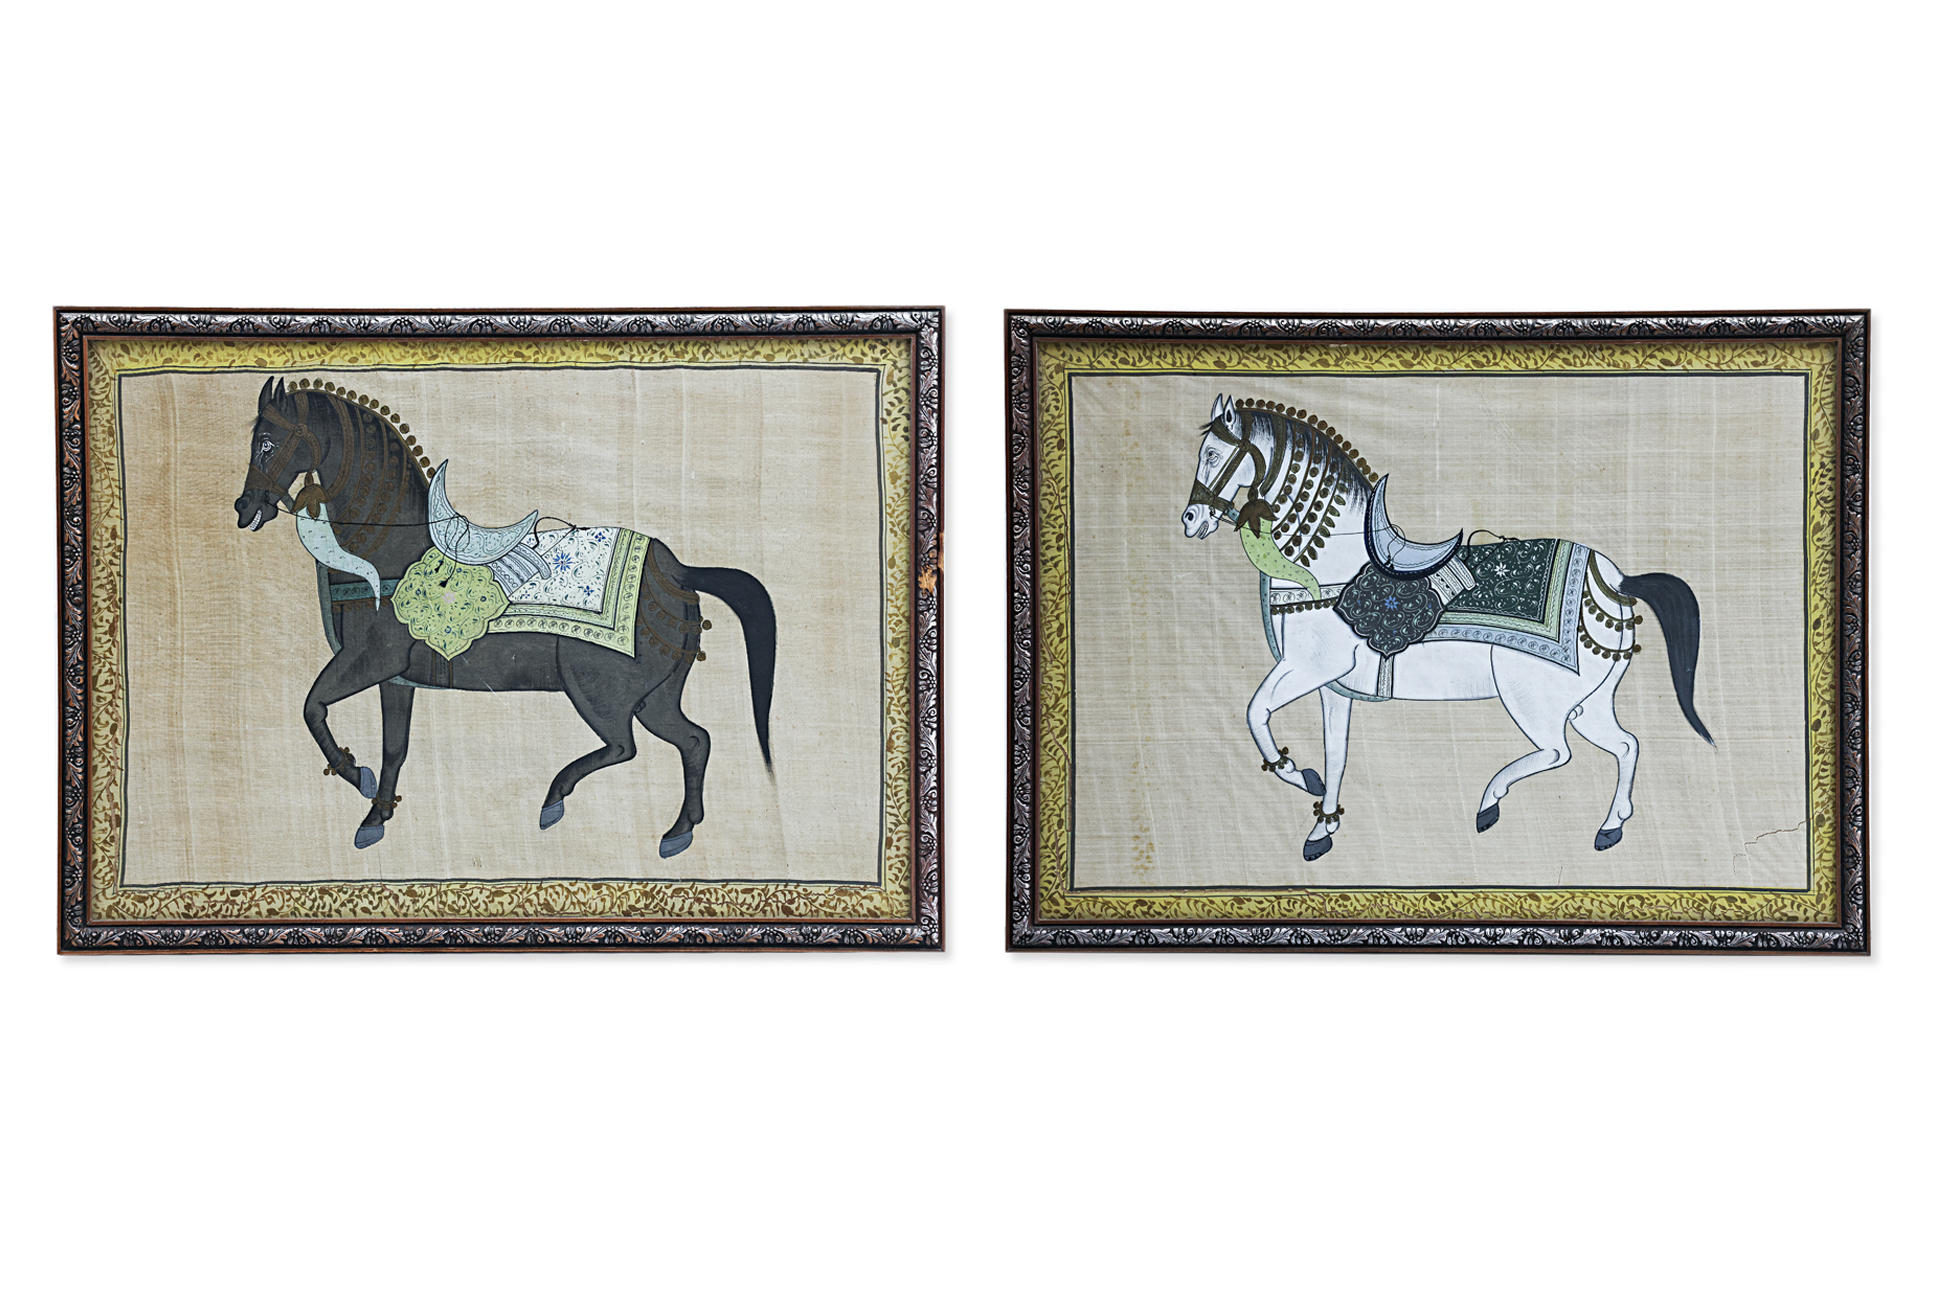 A PAIR OF INDIAN HORSE PAINTINGS ON SILK